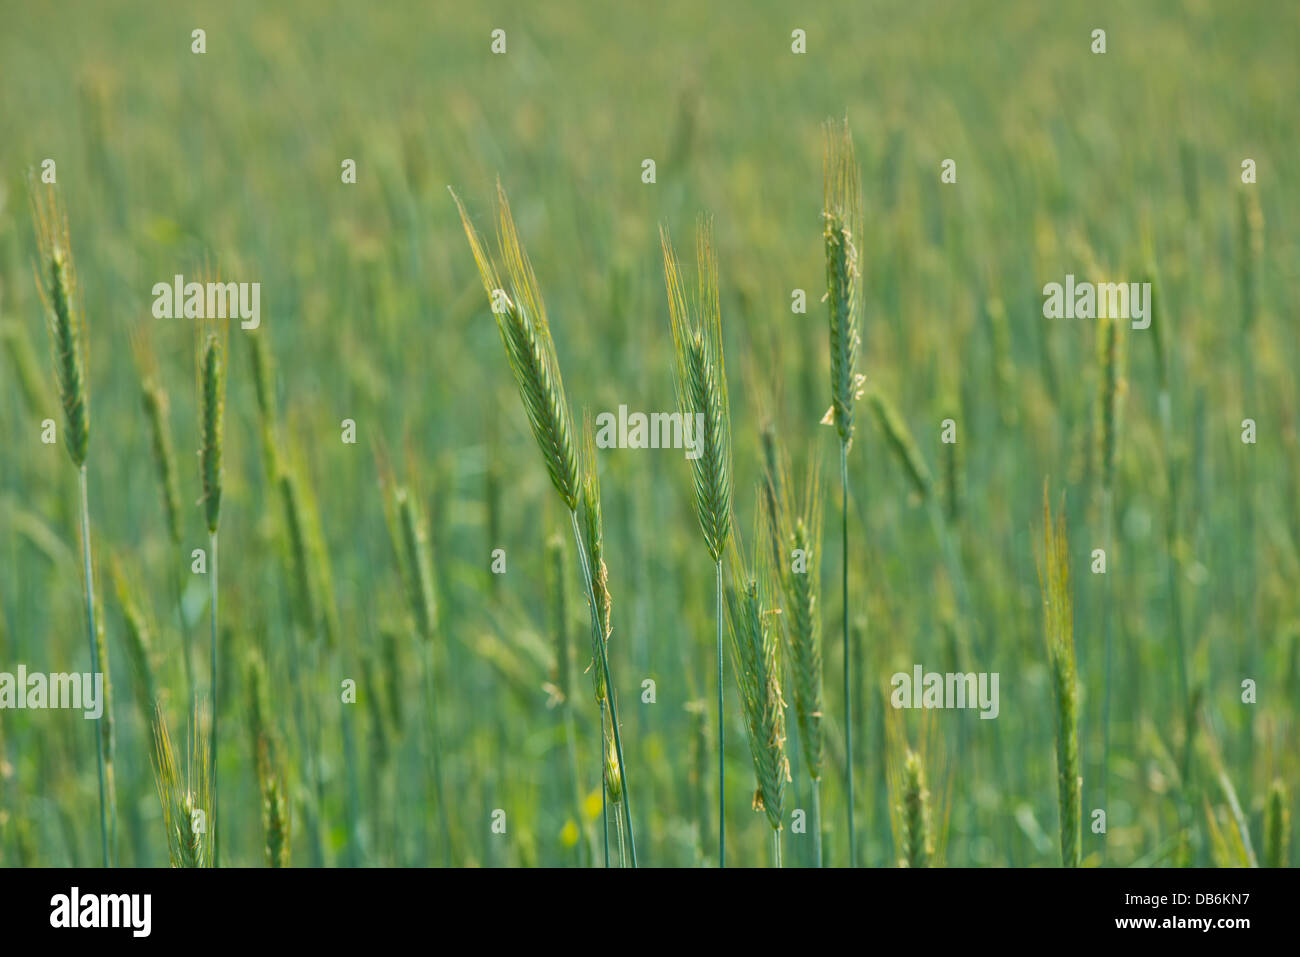 Vast fields of healthy green wheat crops ripening Stock Photo